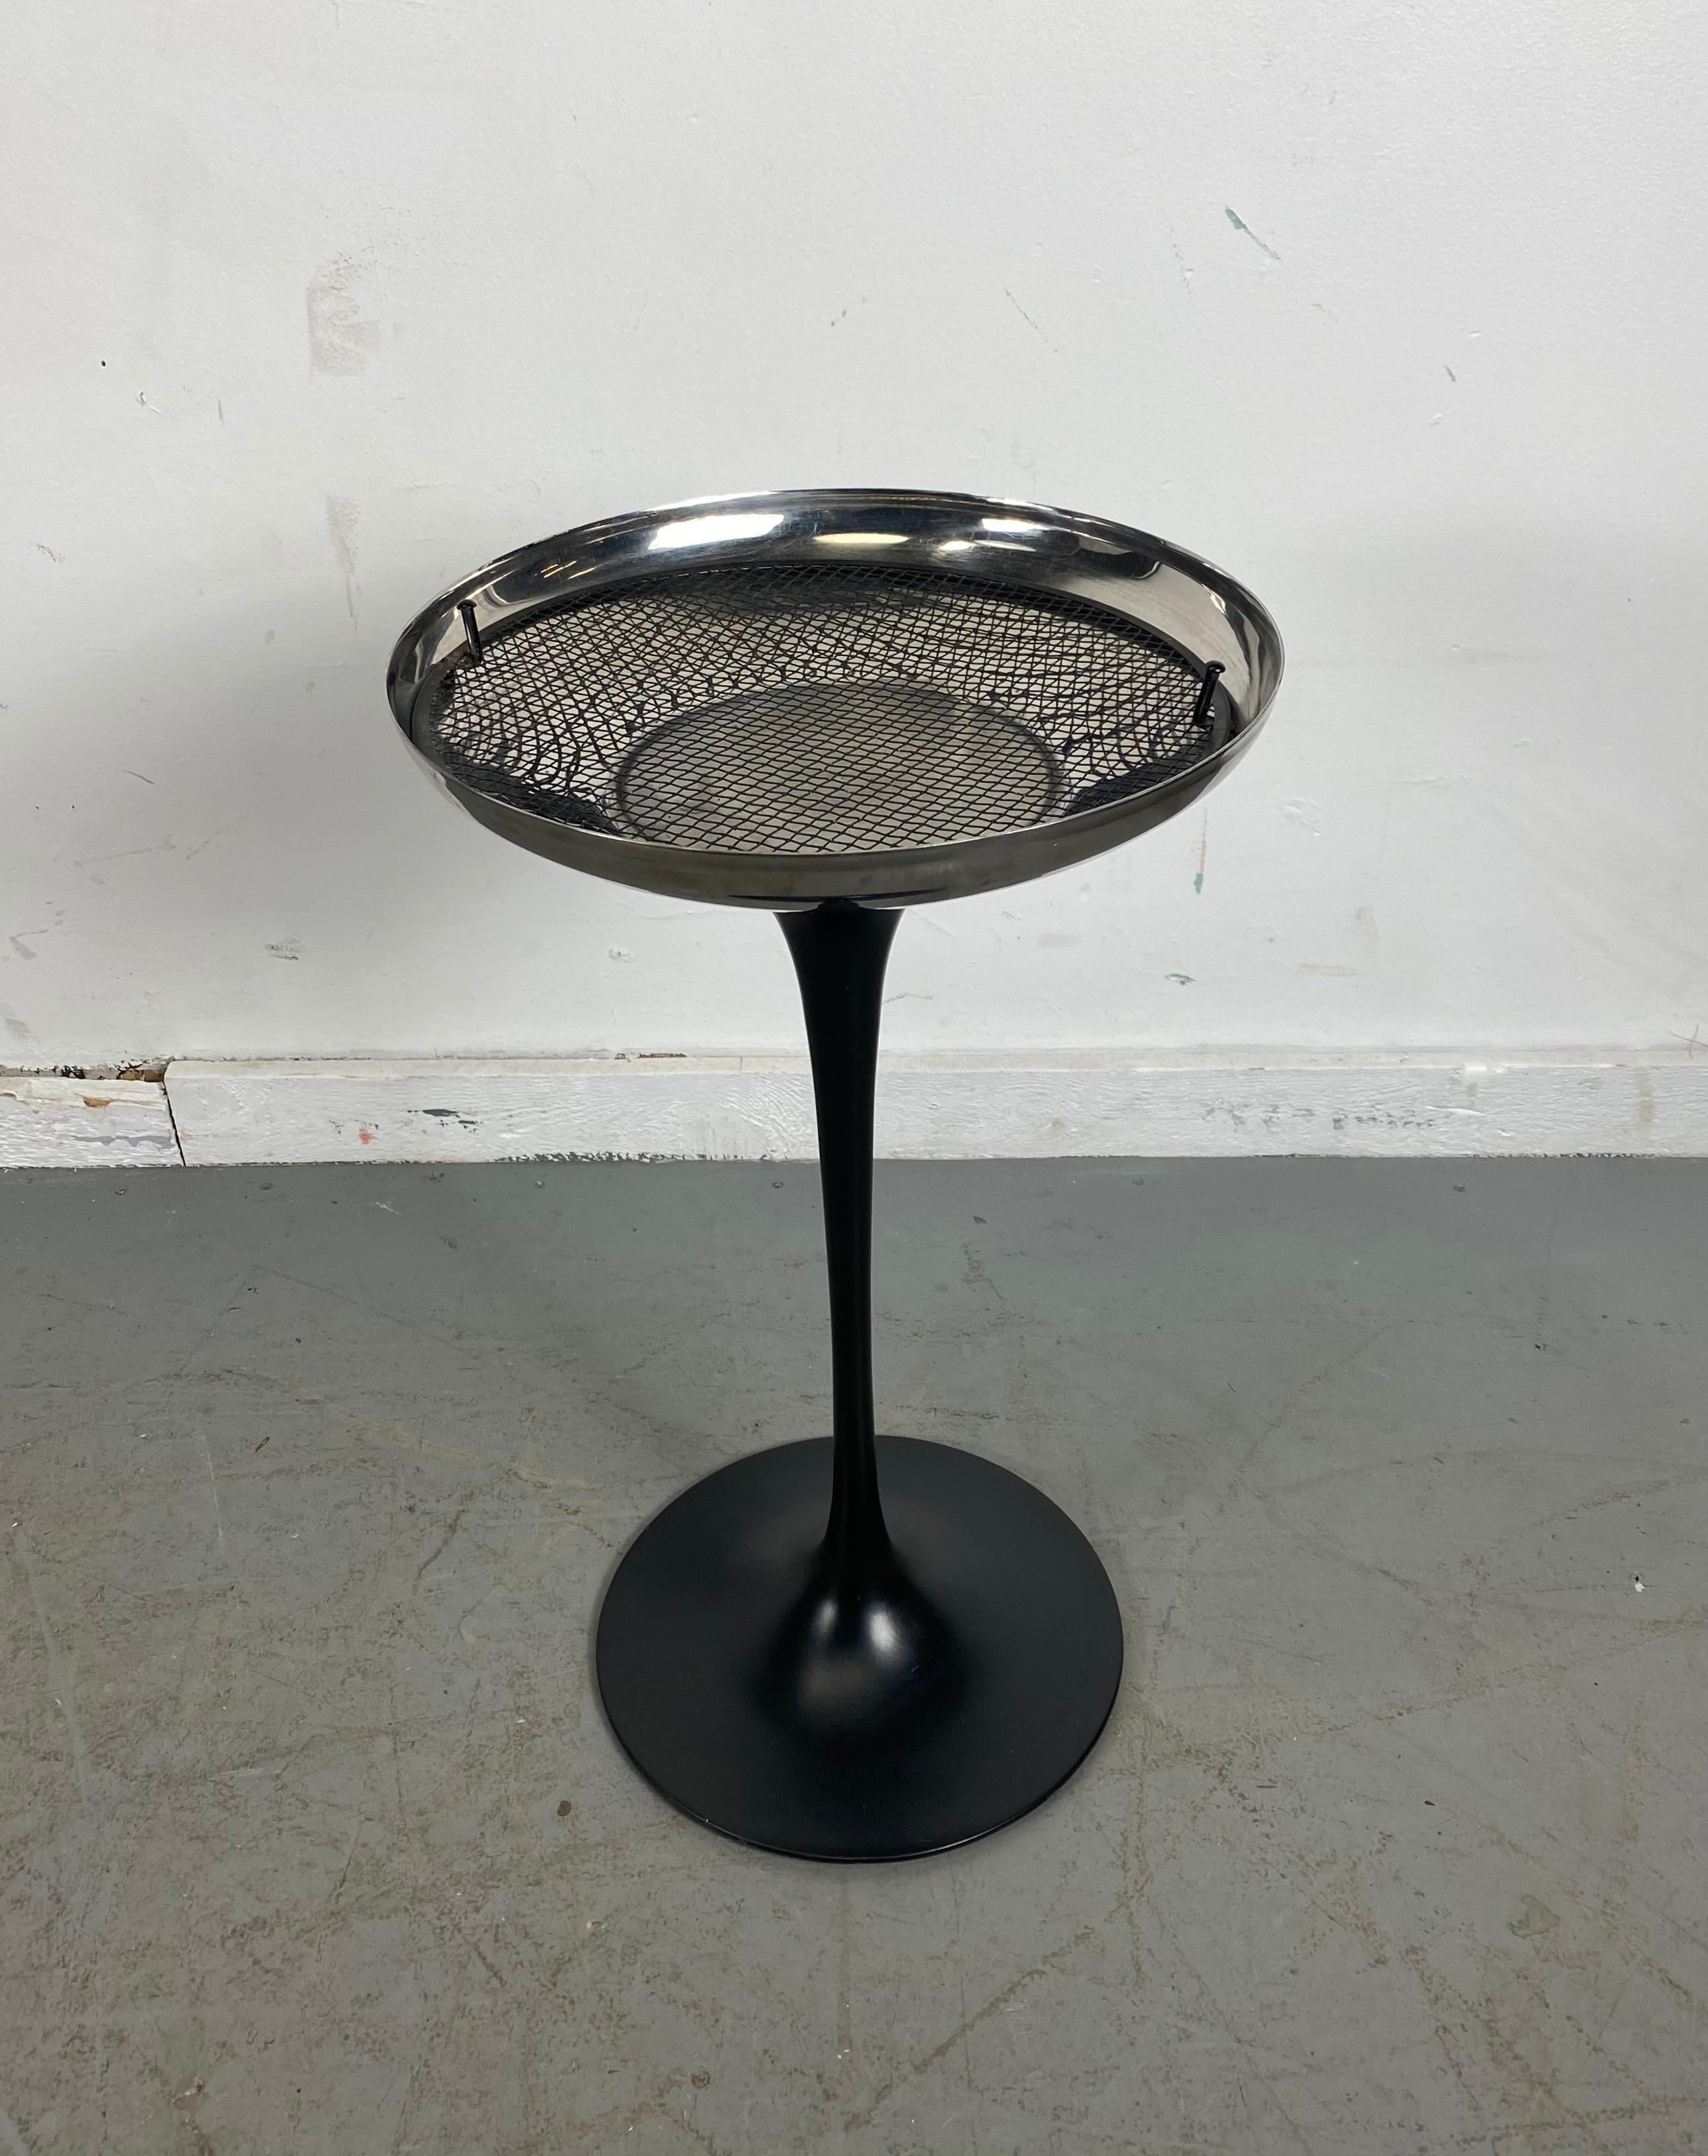 This is an amazing little item you don't see everyday,! Rare tulip pedestal ash stand (receptacle), designed by Eero Saarinen manufactured by Knoll, purchased originally from a former Knoll employee, used only as display for Knoll showroom, retains